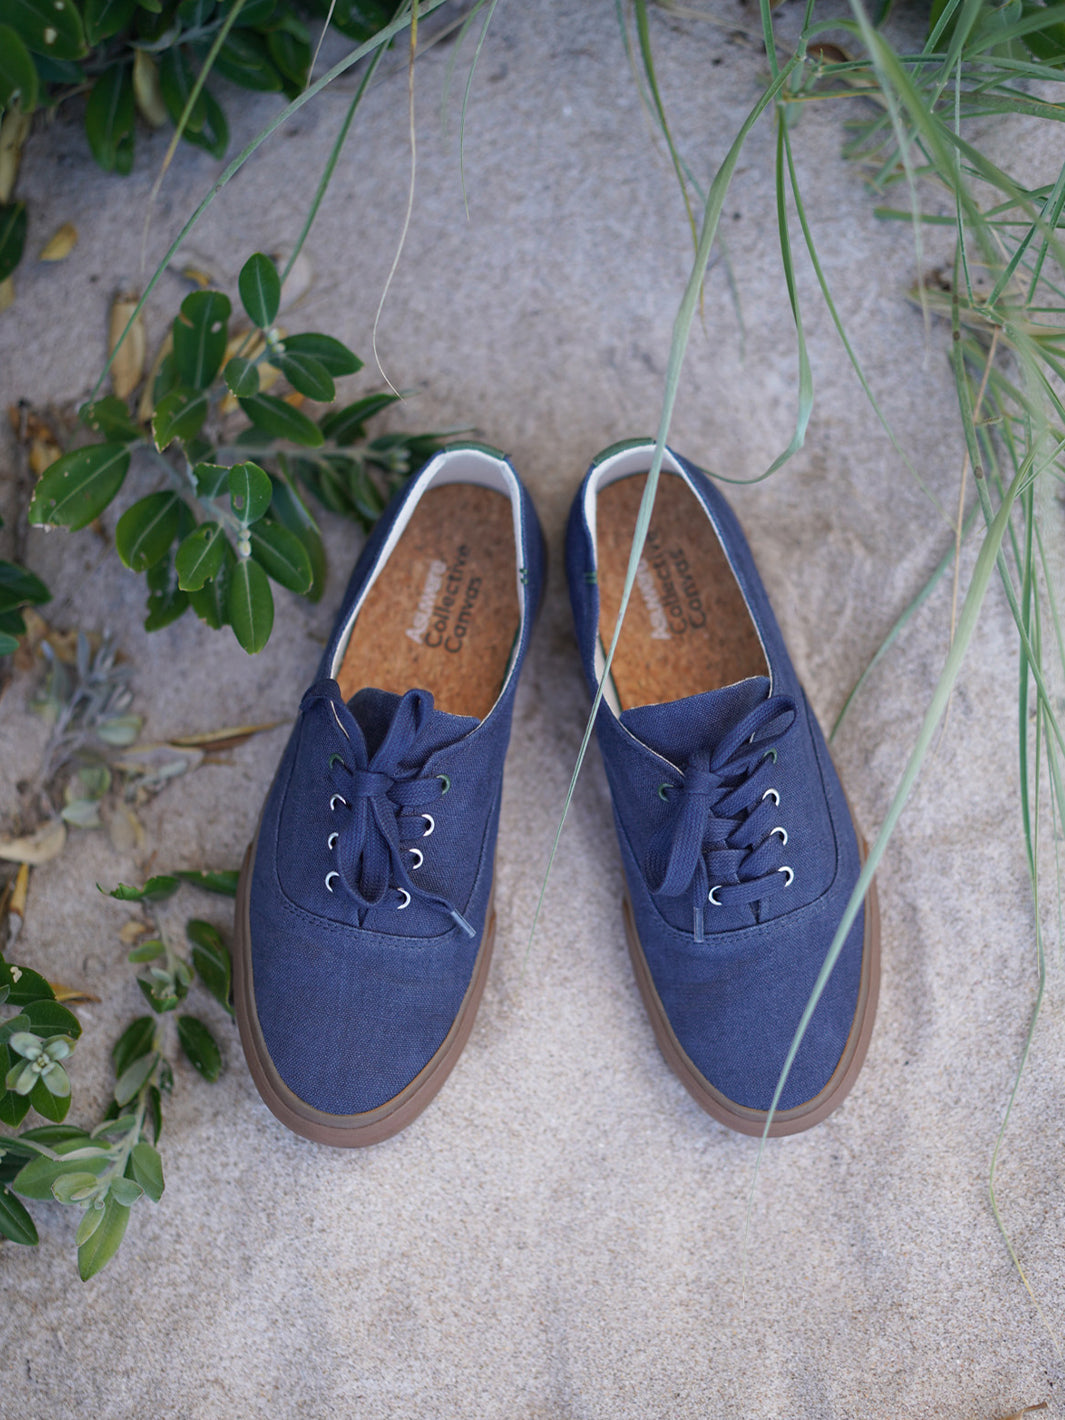 Collective Canvas x Asuwere Oxford Sneaker - Navy